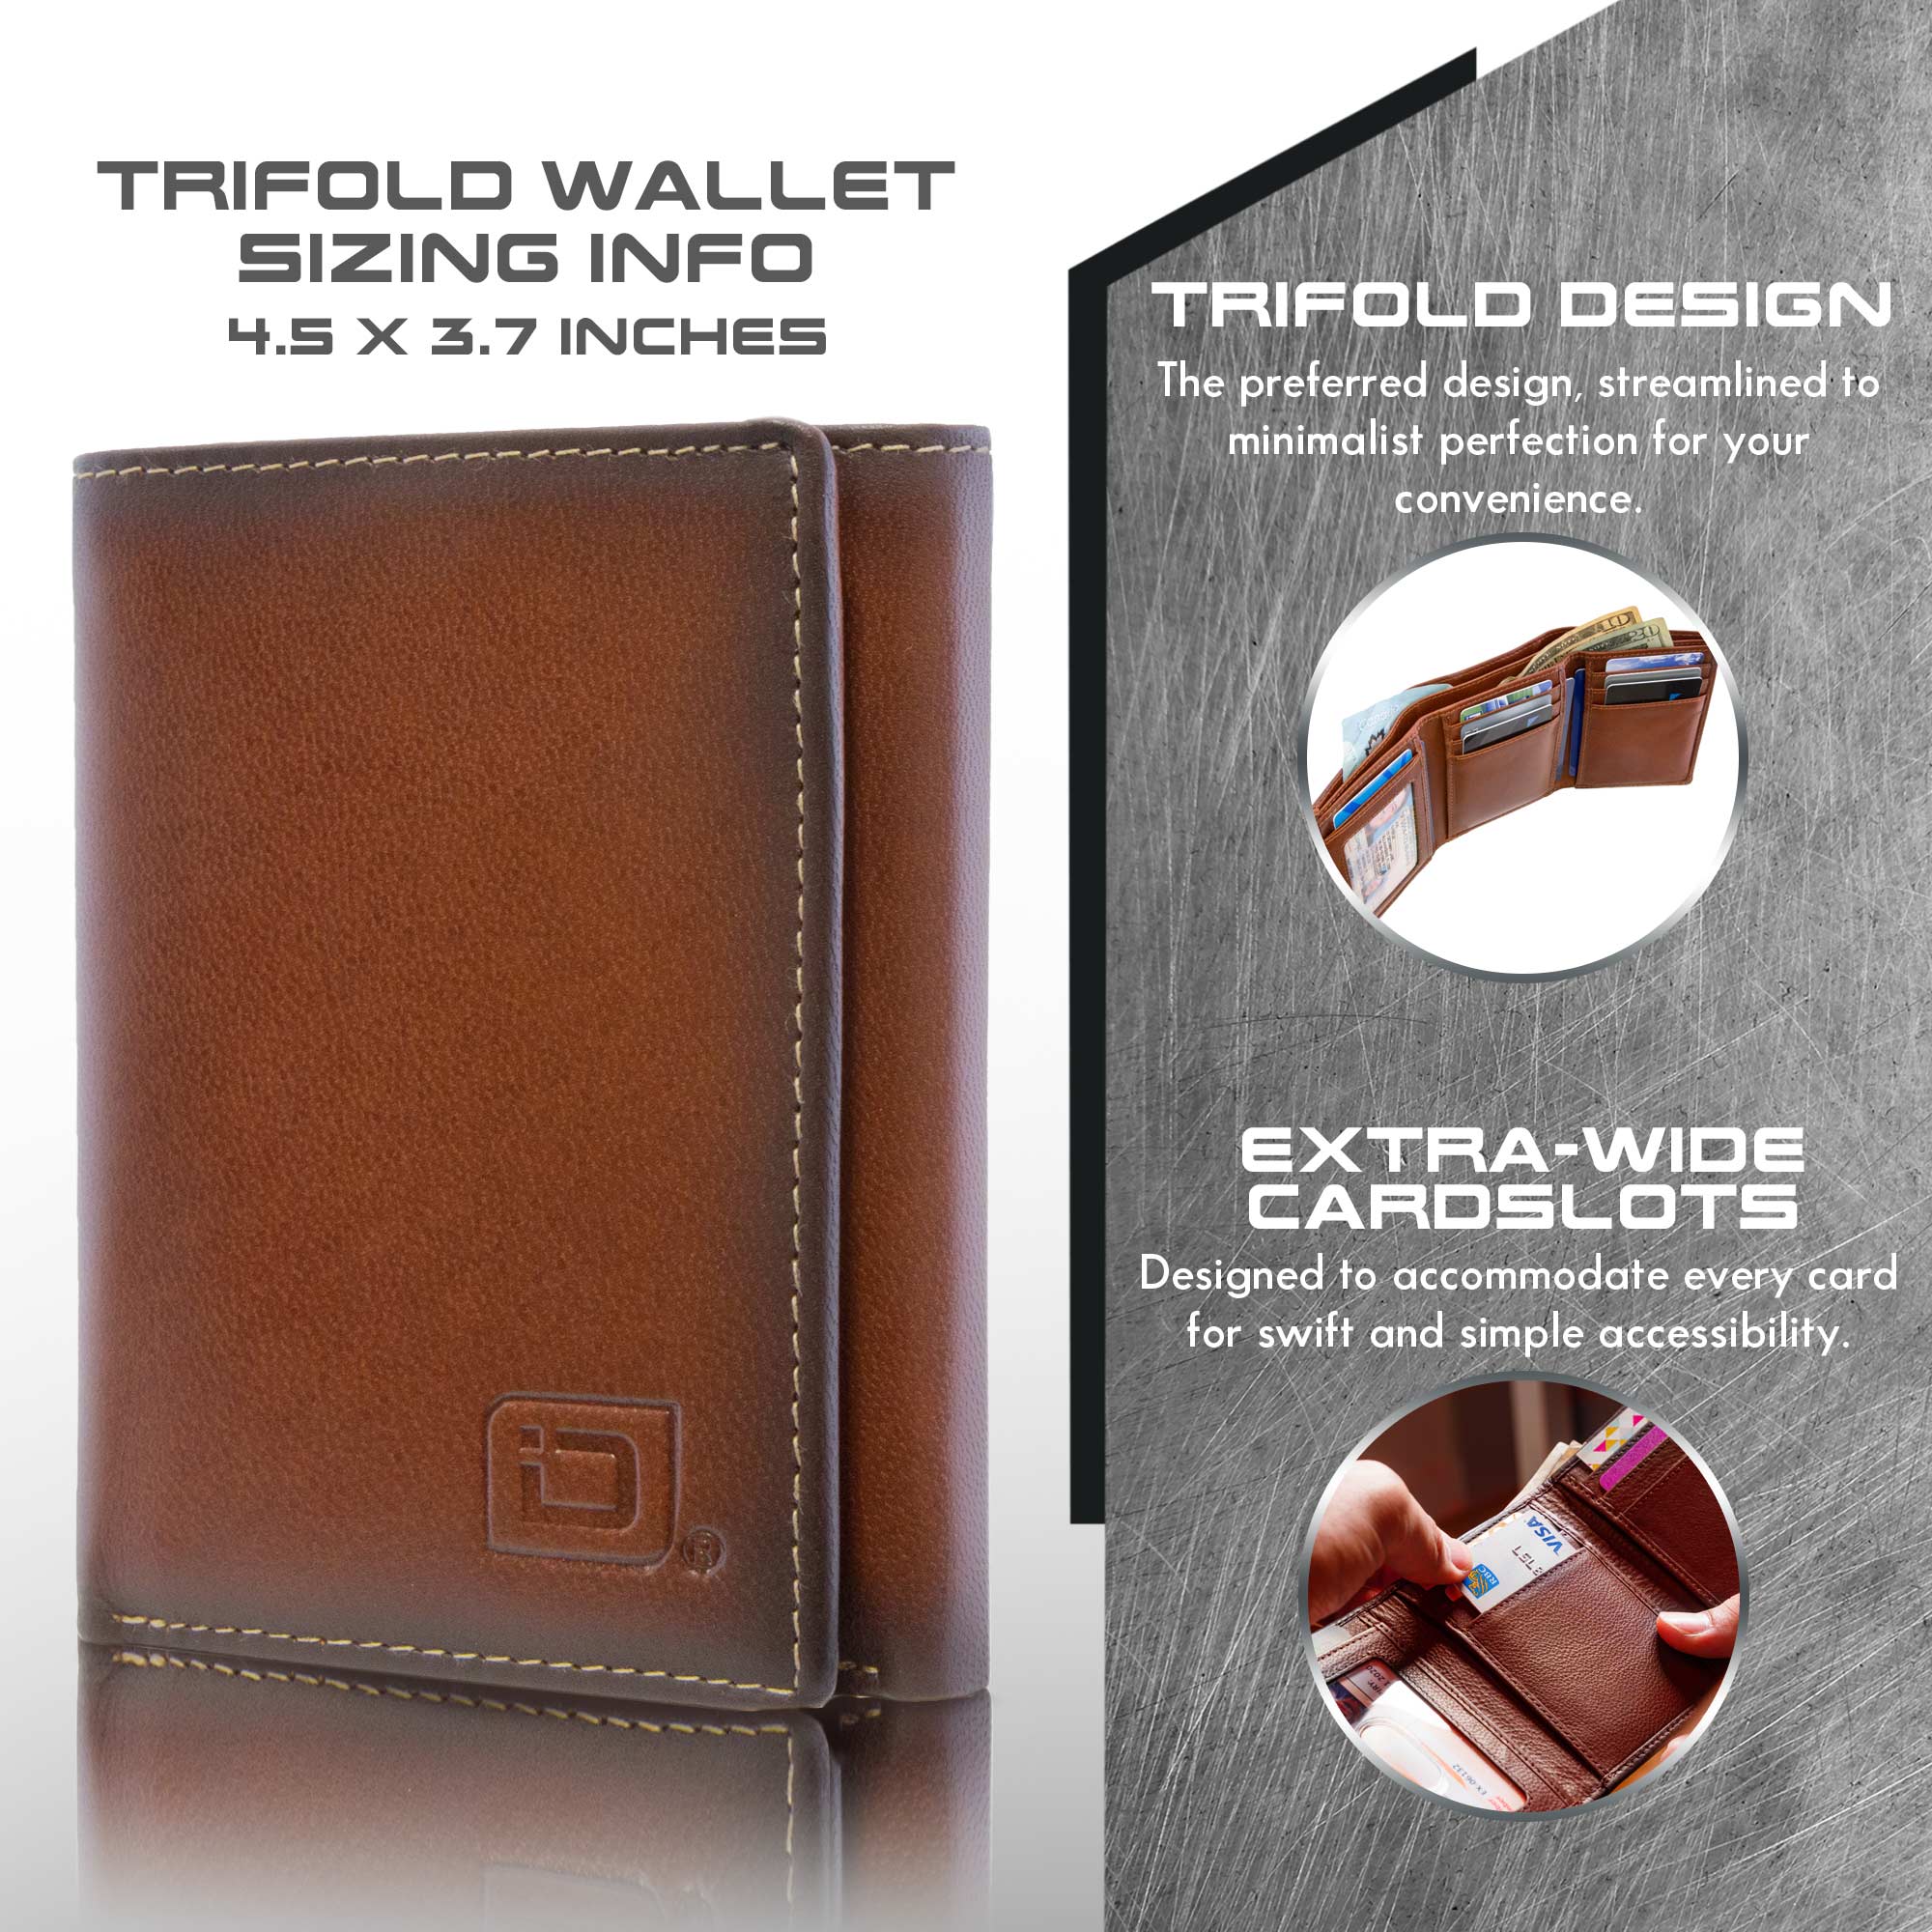 Mens RFID Wallet - Extra Capacity Trifold 8 slot with ID Window